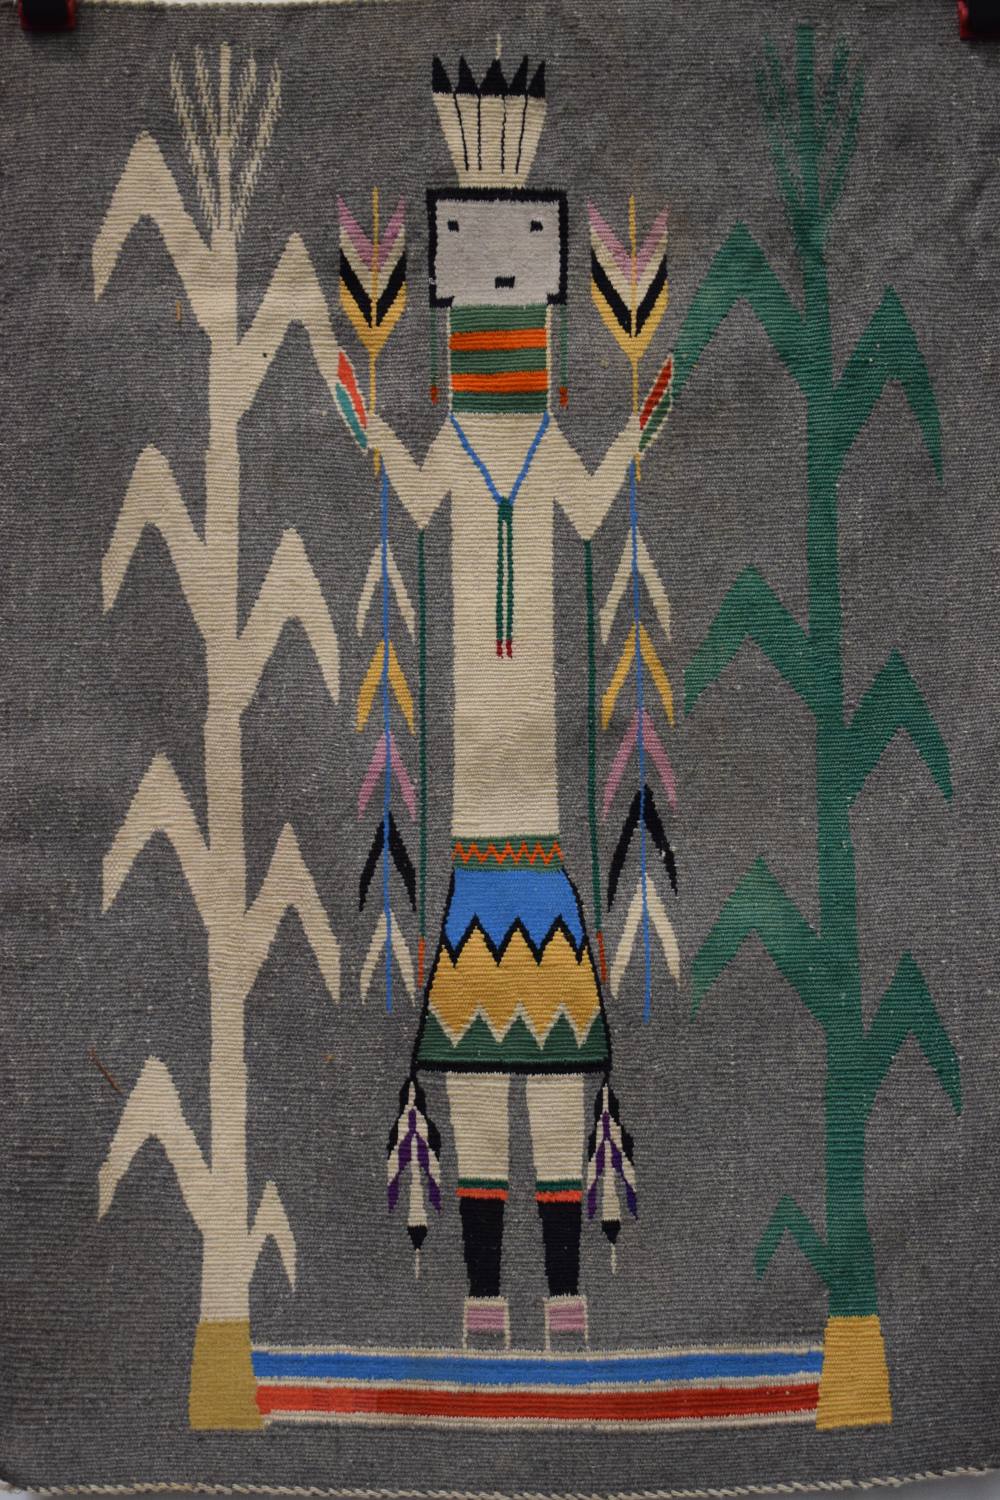 Navajo pictorial blanket, American south west, probably first half 20th century, 2ft. 6in. x 1ft. - Image 2 of 6